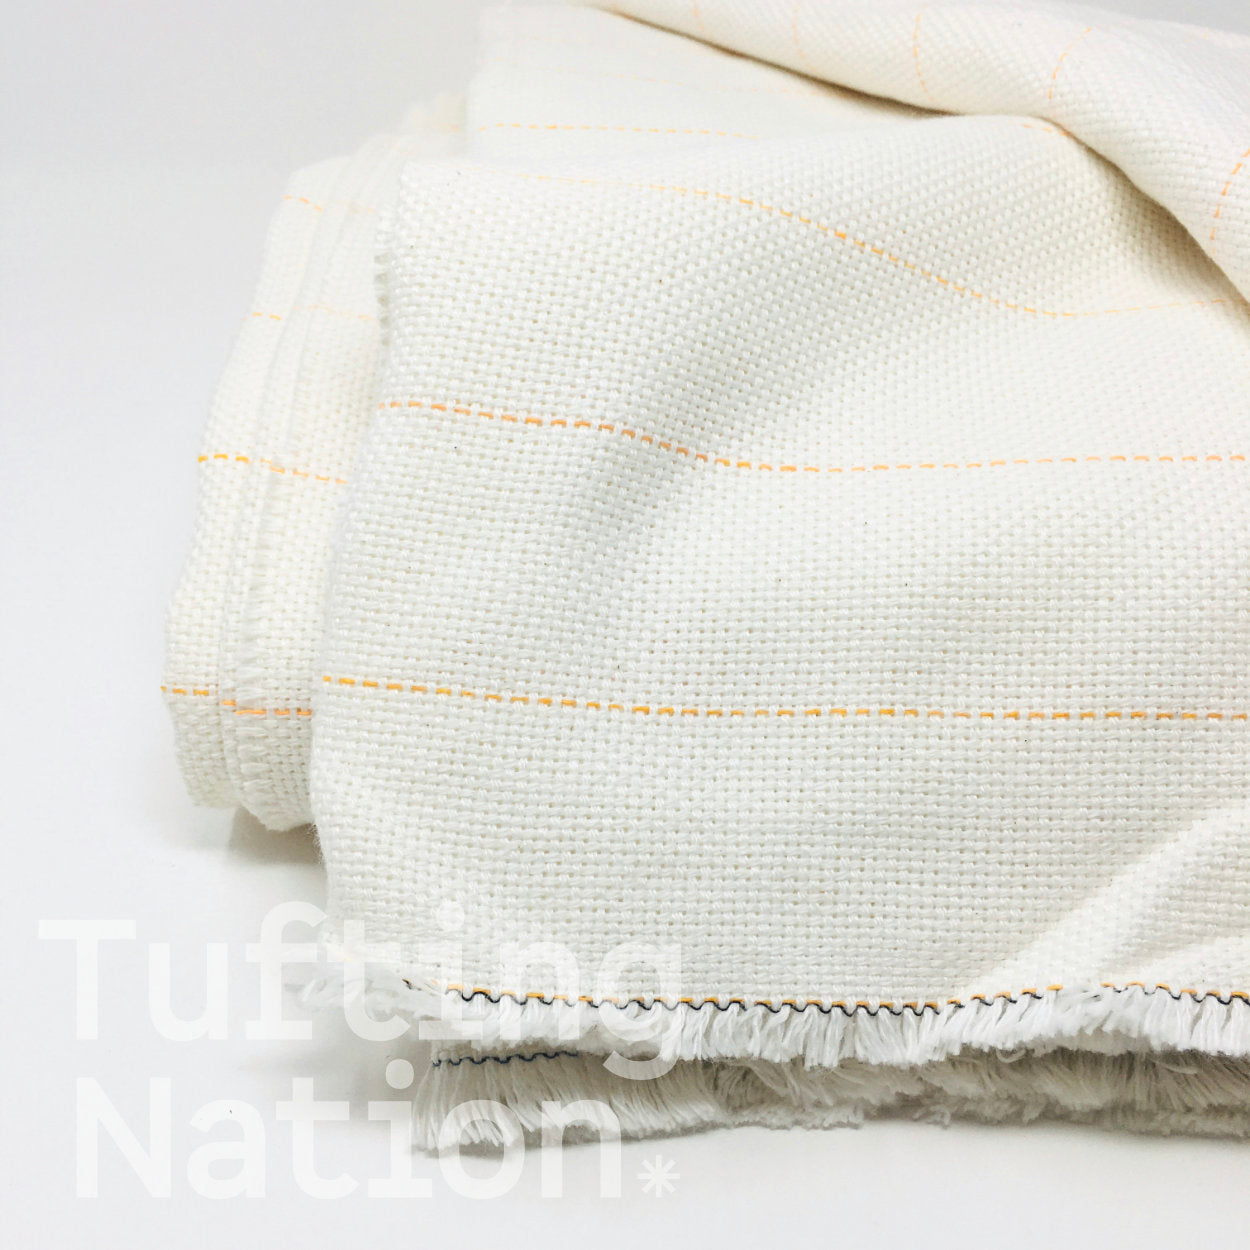 Primary tufting cloth - by the inch – Tufting